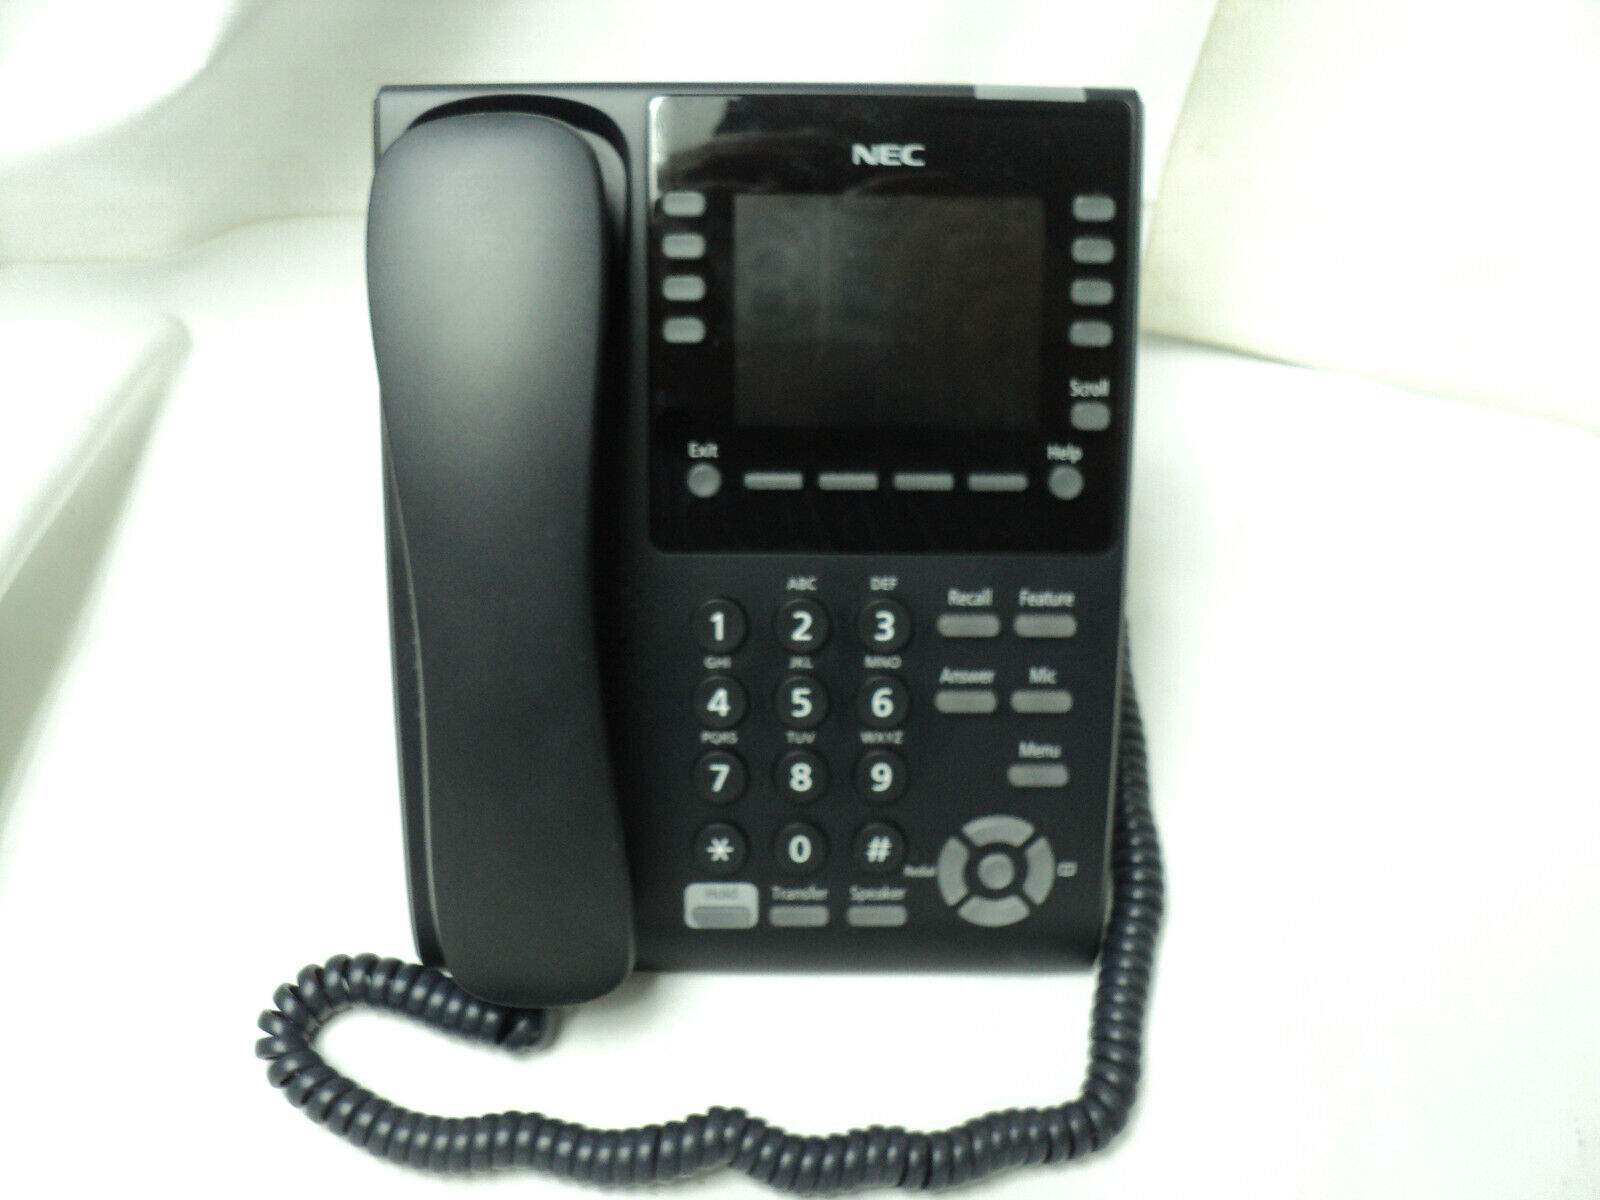 NEC ITY-8LCGX IP Phone Color DT800 Business VoIP Gigabit Warranty DT820 BE117839